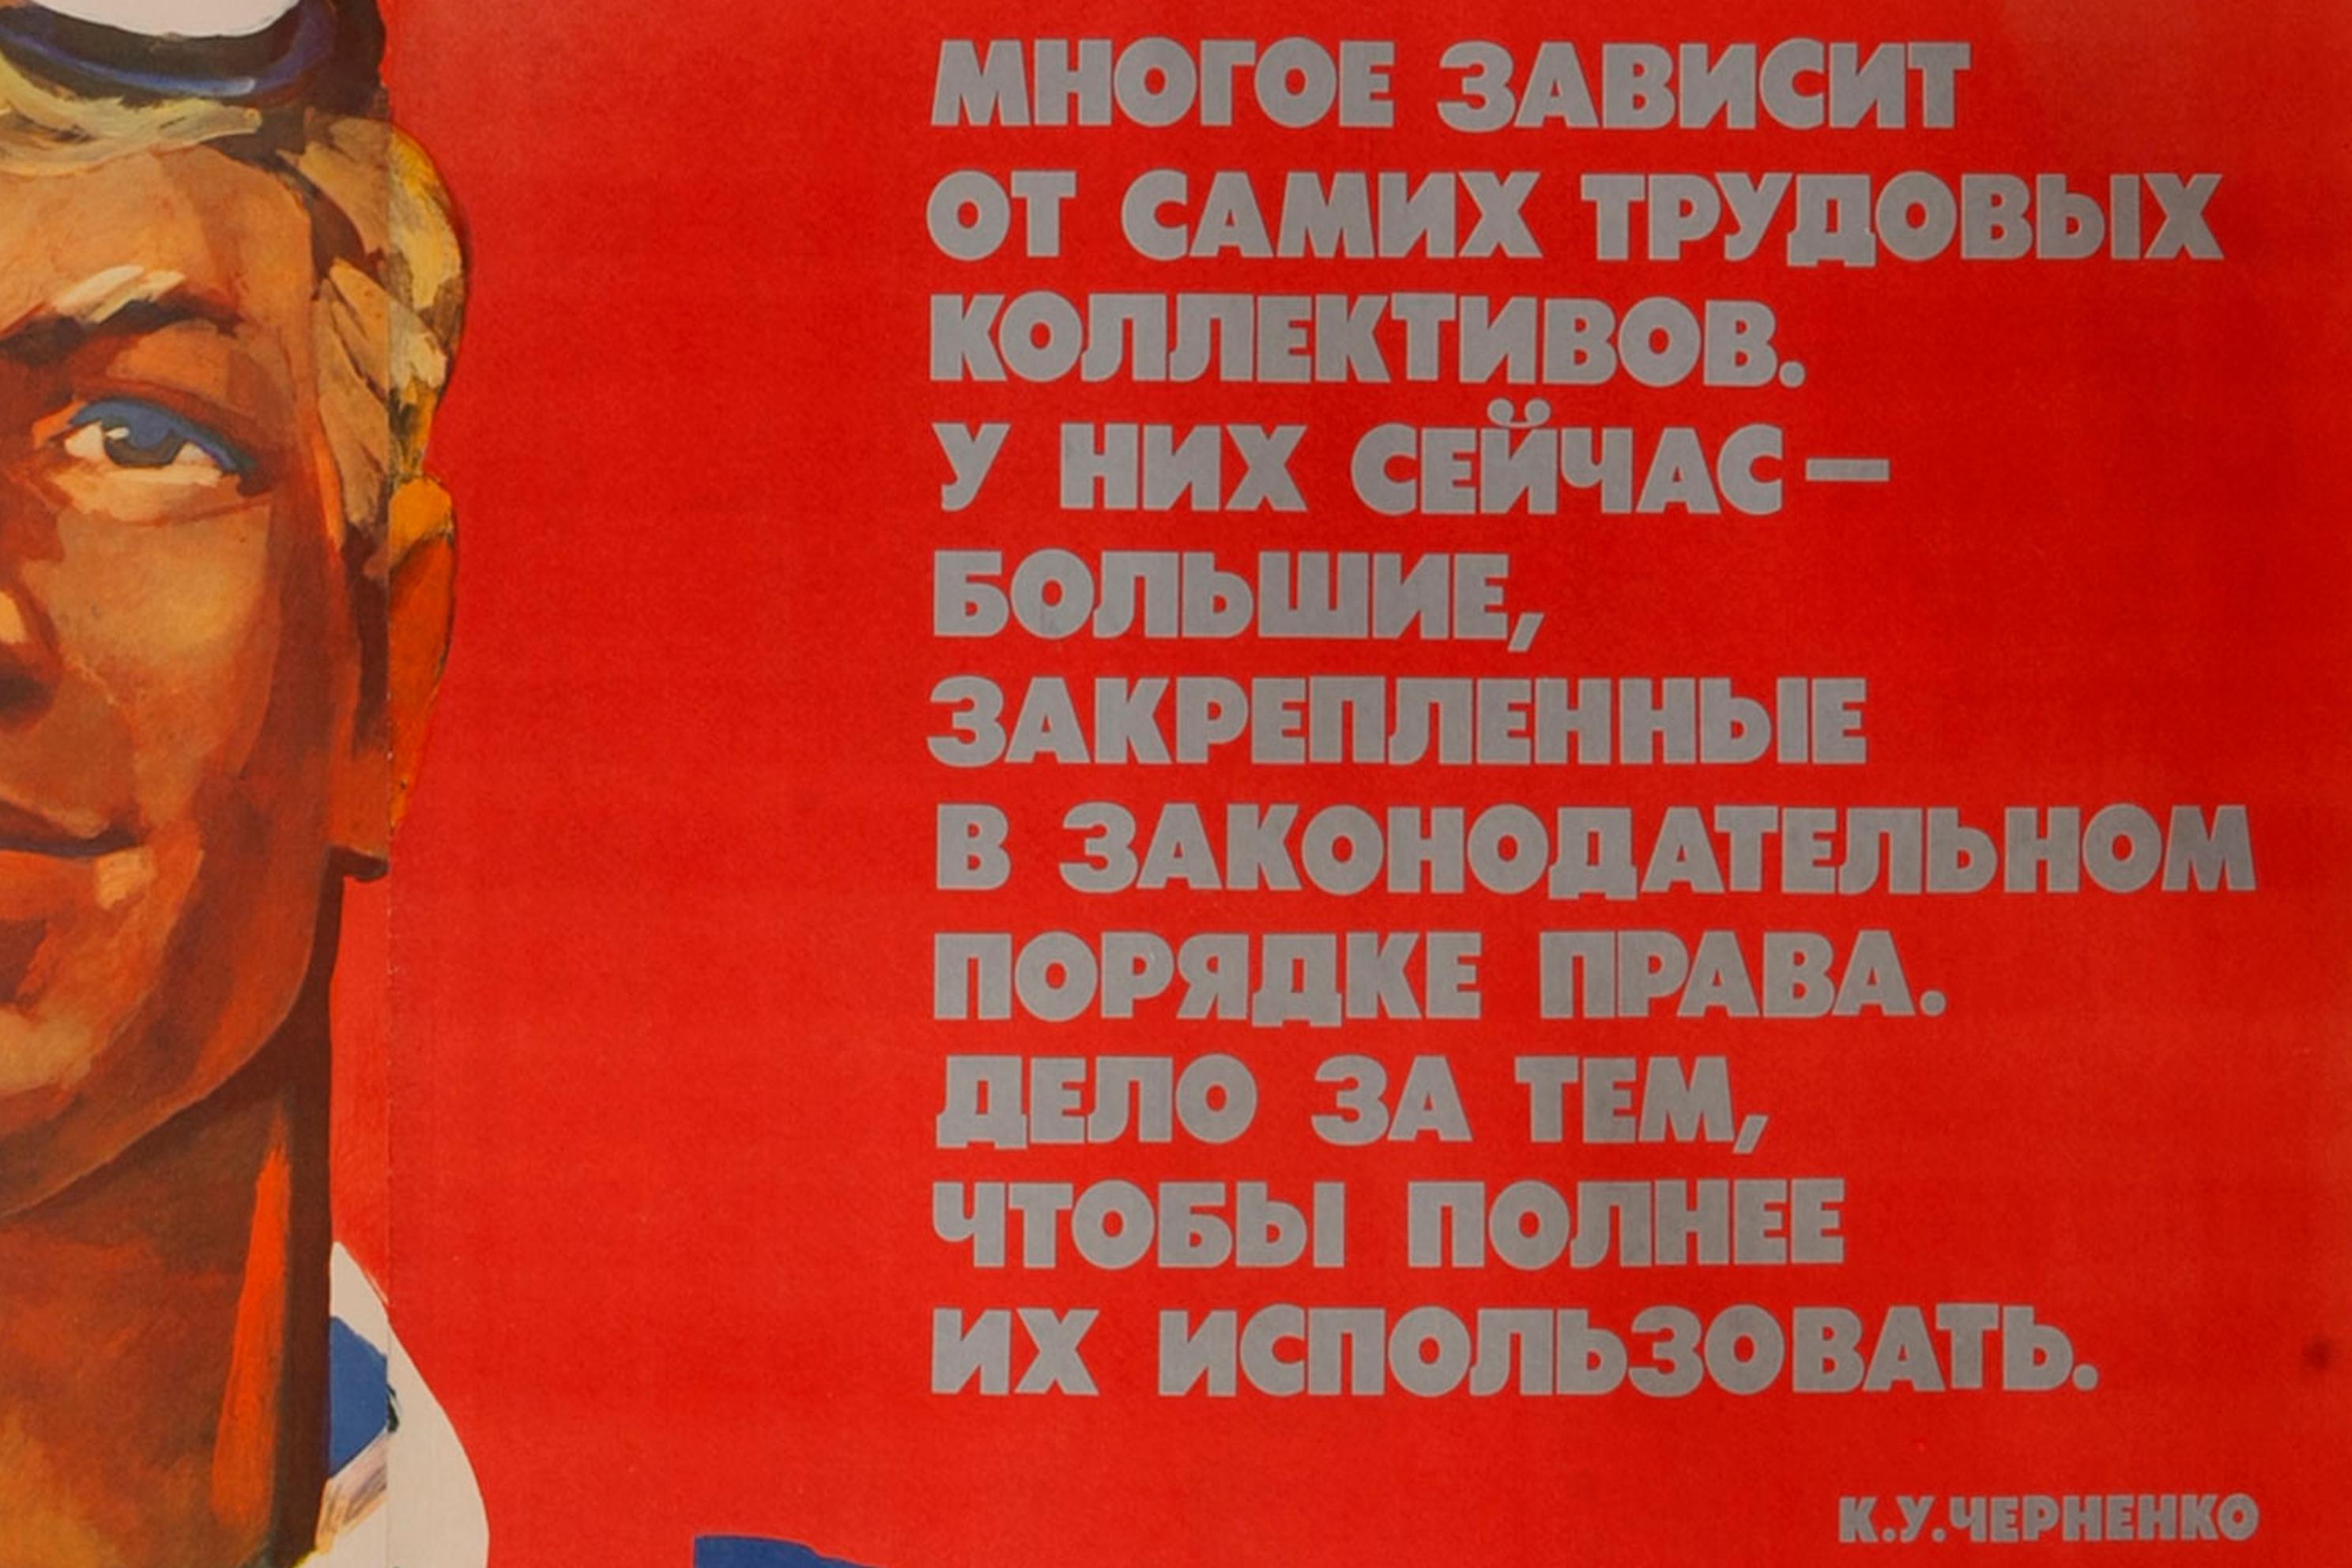 A Strikingly Handsome Worker Invites Others to the New USSR Reforms on Labor Collectives. A Bold, Colorful and Spectacular GRAPHIC. Large Scale (6.5 by 4 feet)
Poster is Backed on Sturdy Linen

Translation:
USSR LAW ON LABOR COLLECTIVES INVITES